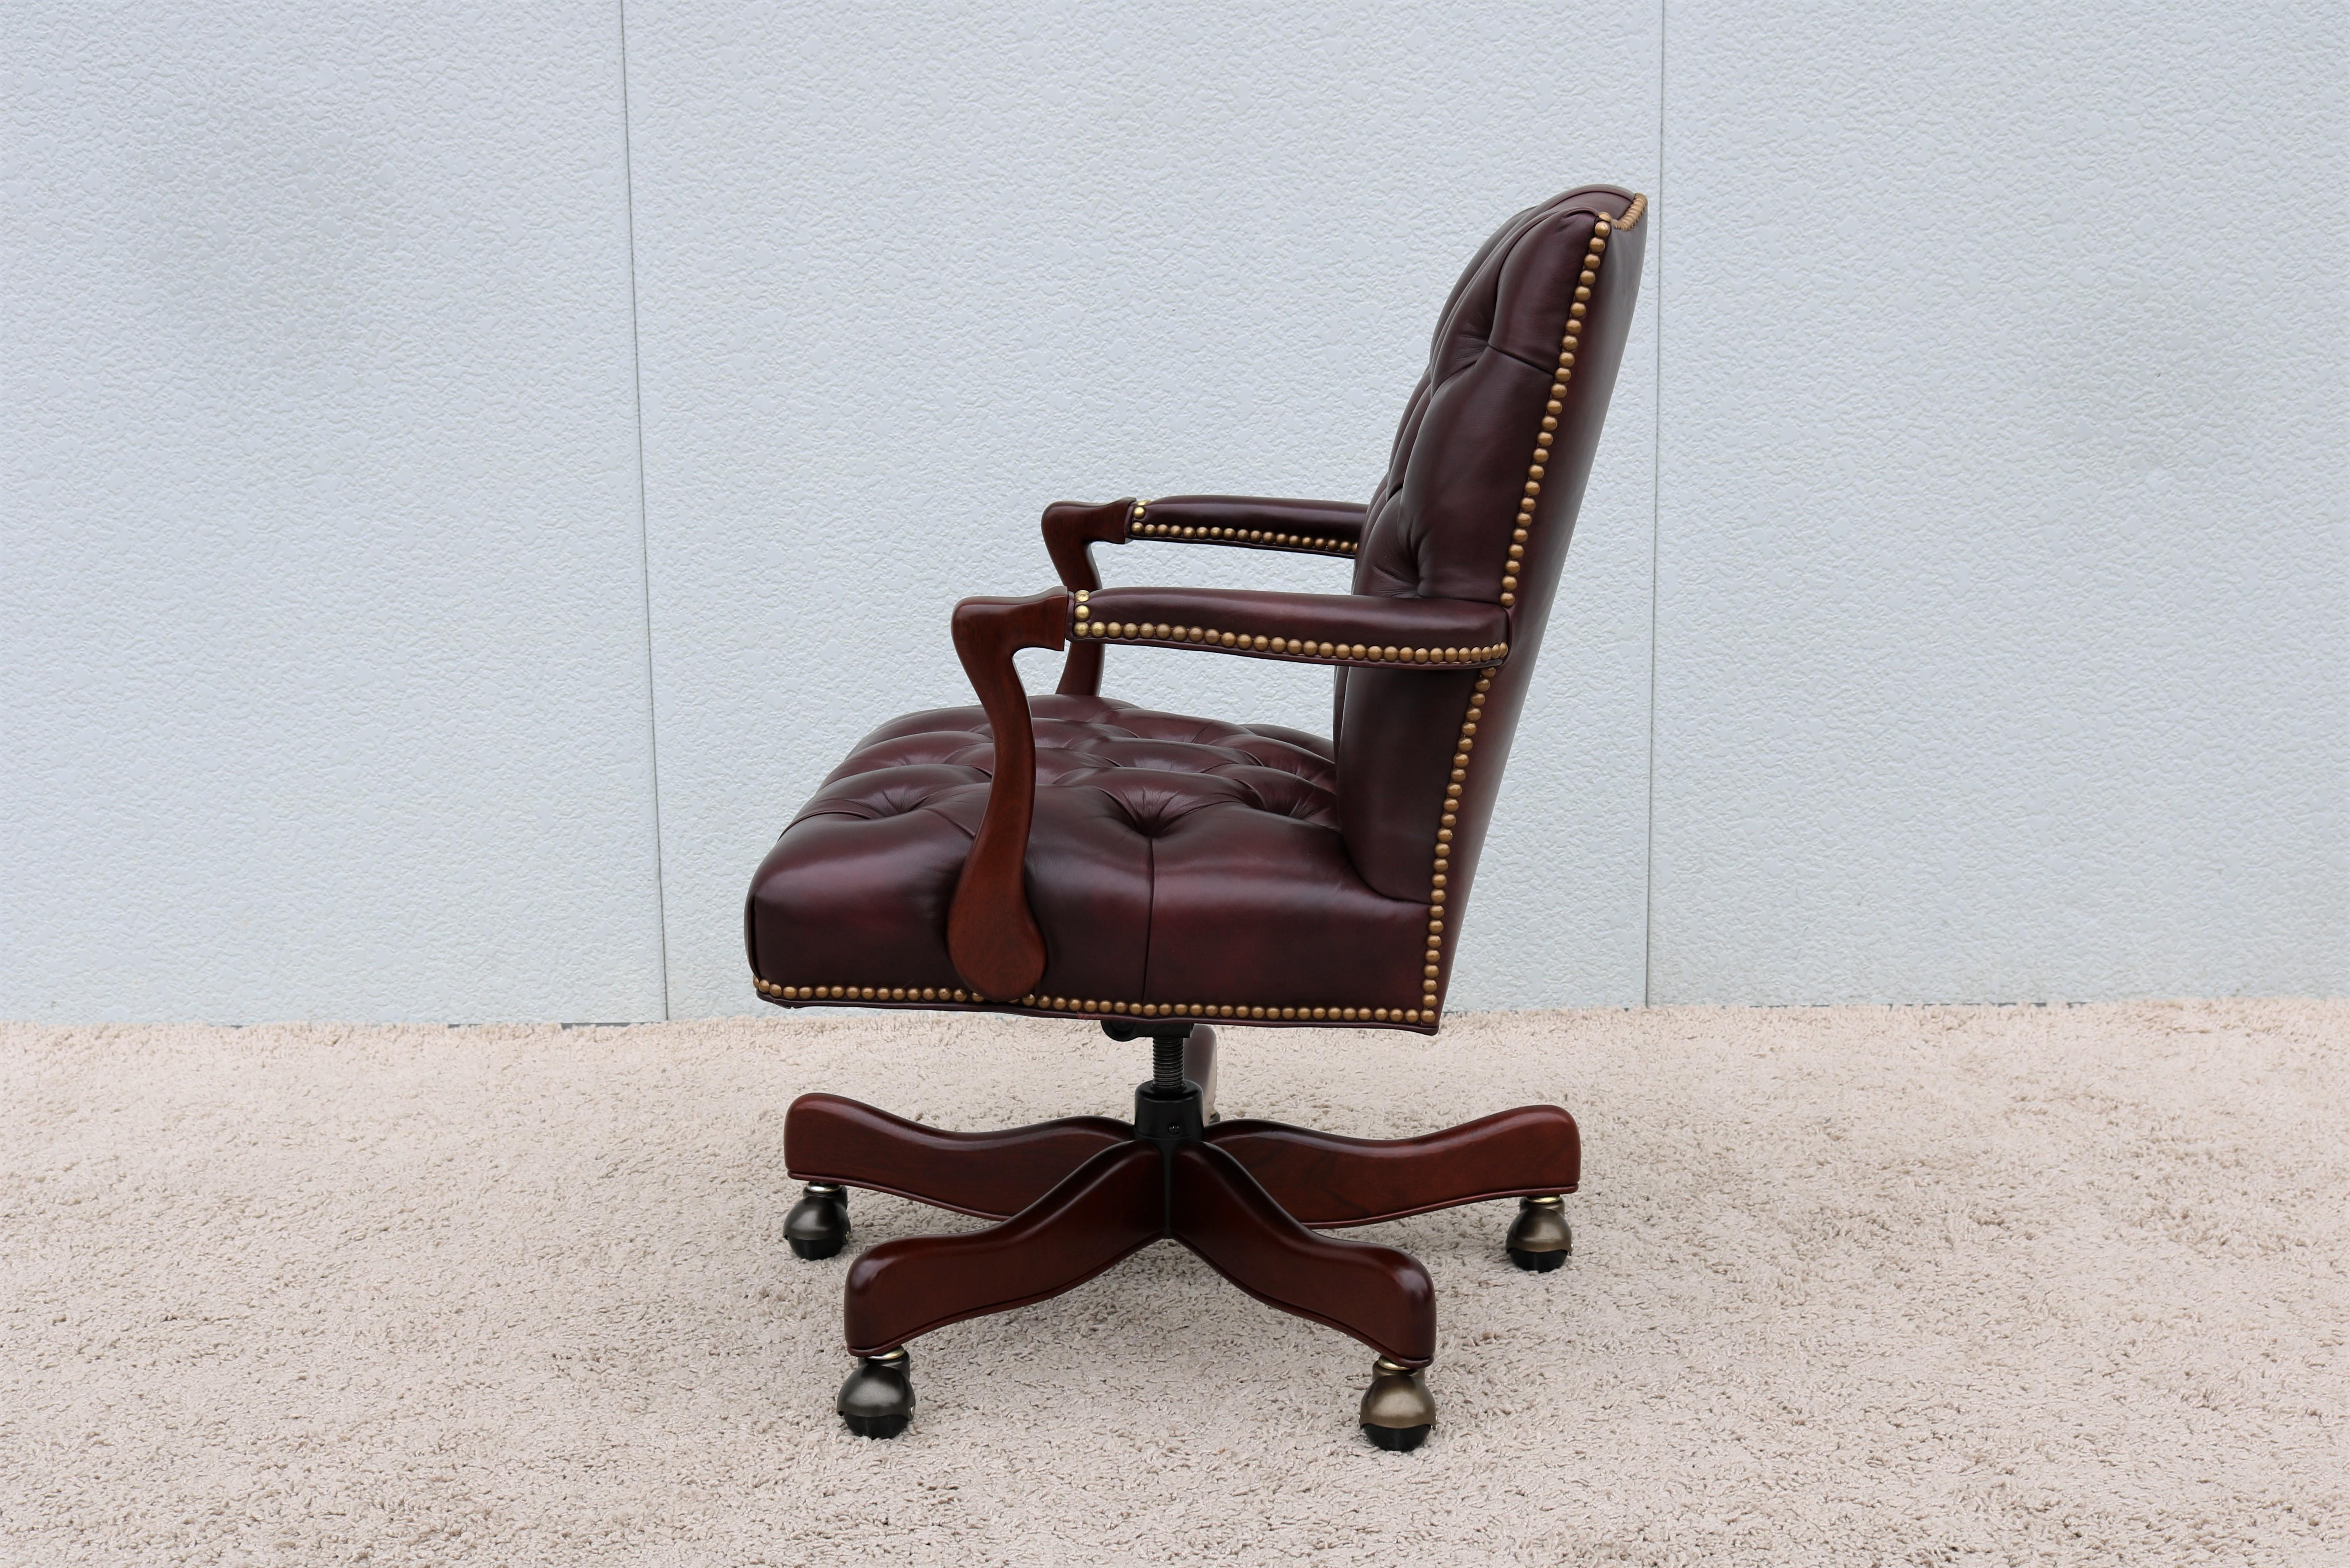 Hand-Carved Classic Cabot Wrenn Graham Tufted Burgundy Leather Executive Swivel Desk Chair For Sale